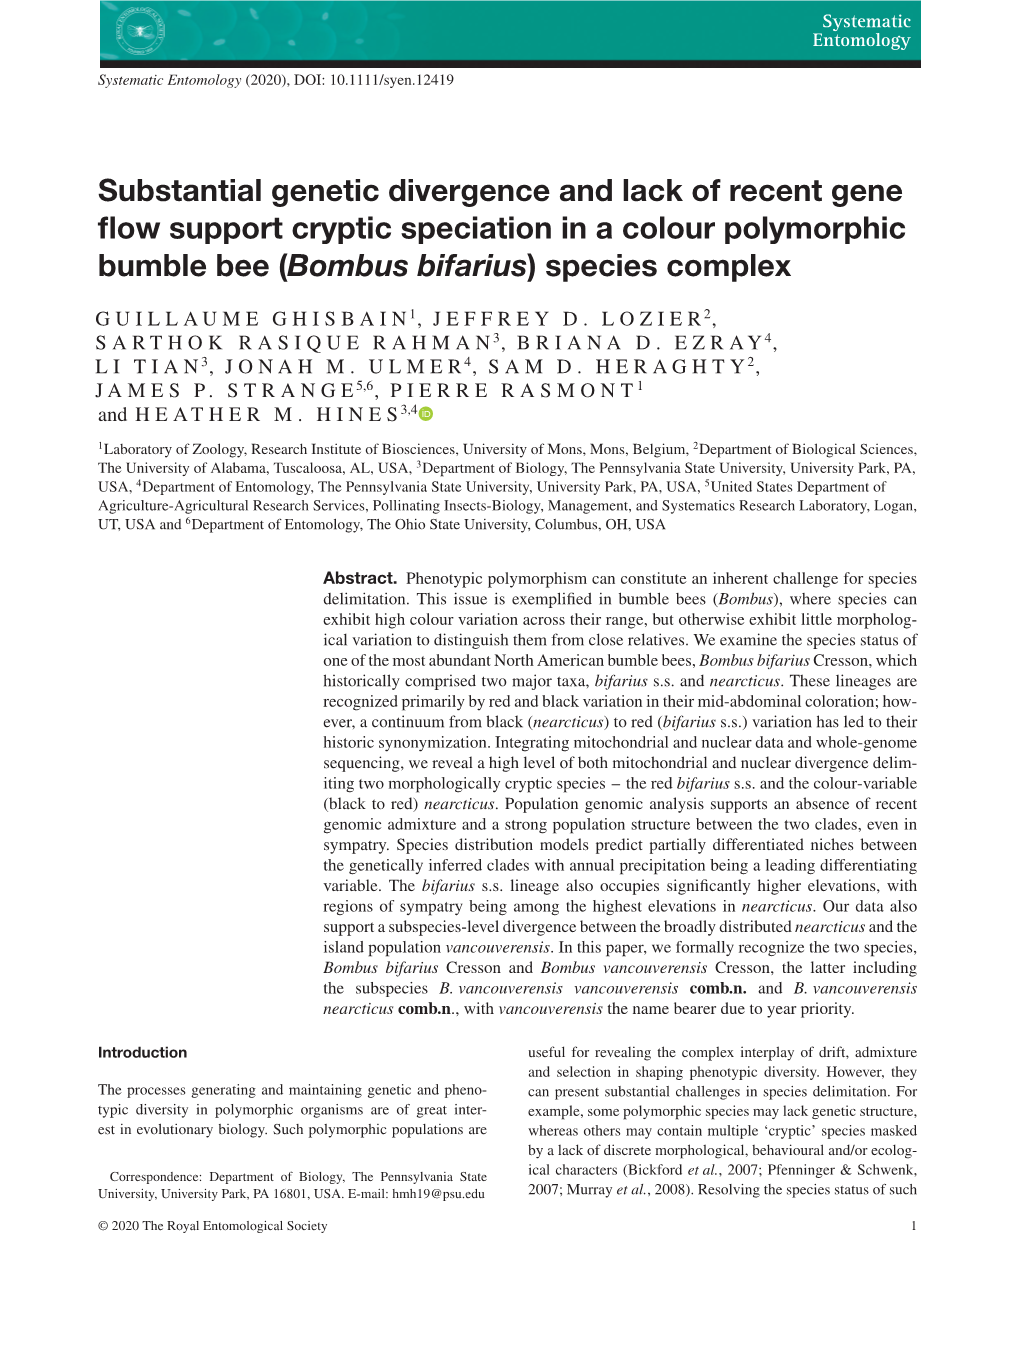 Substantial Genetic Divergence and Lack of Recent Gene Flow Support